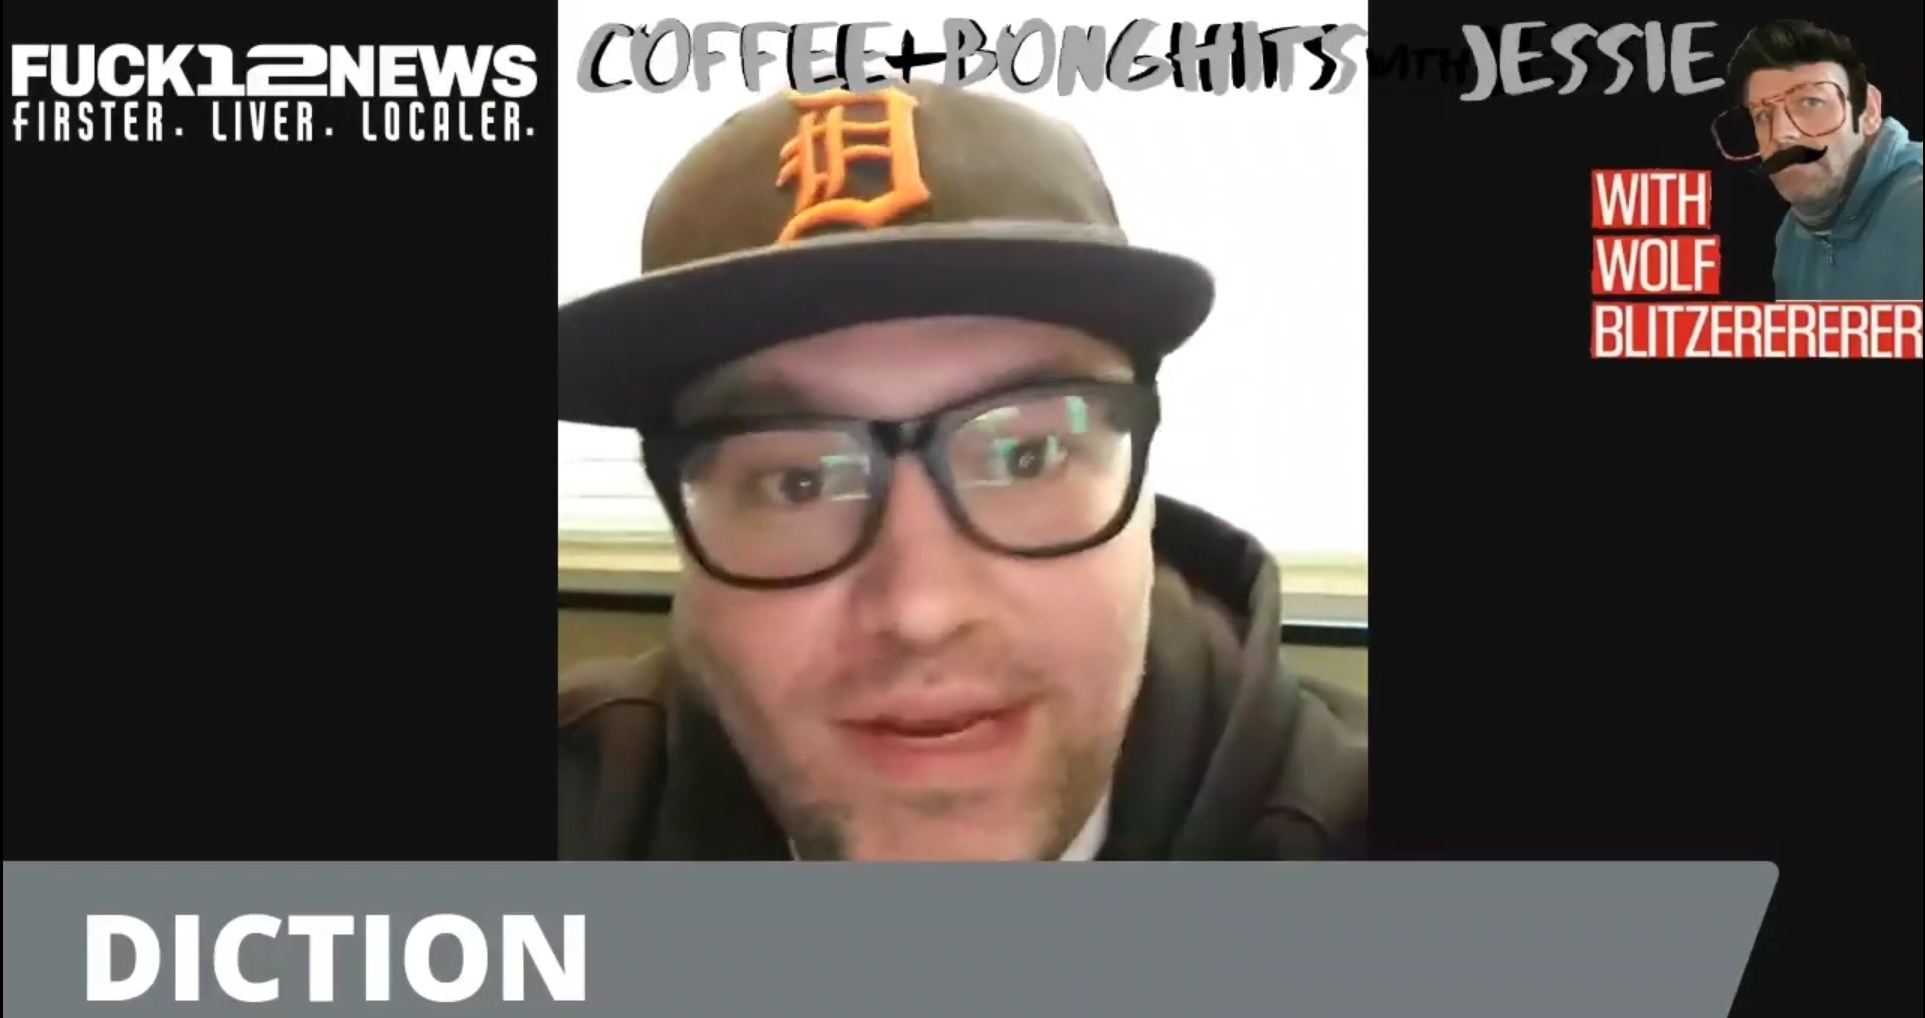 Rapper Diction Uno comes on Coffee+Bonghits to talk about the chase for dopamine